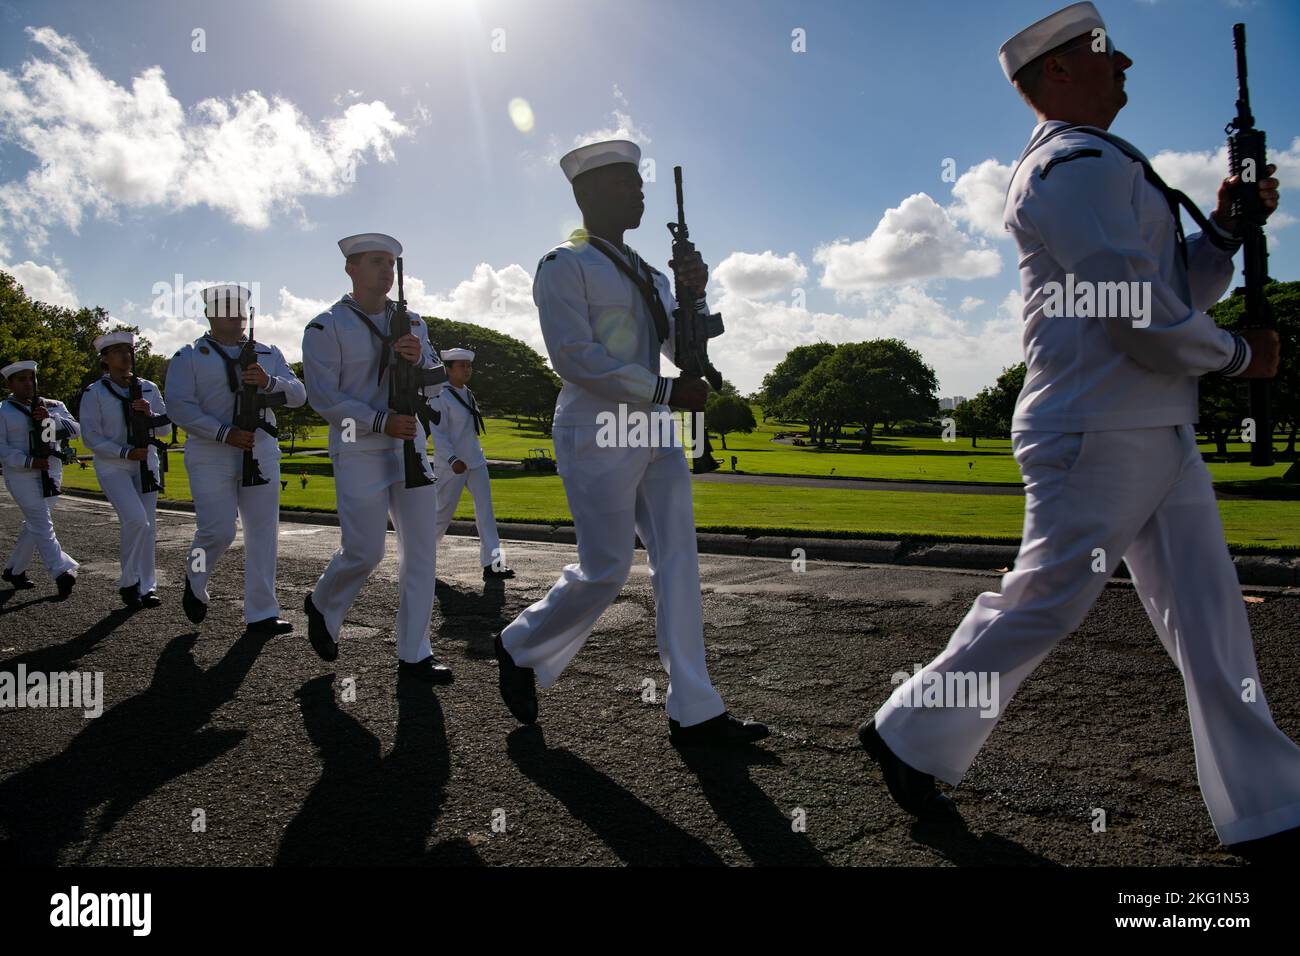 U.S. Navy Sailors assigned to Navy Region Hawaii and the Defense POW/MIA Accounting Agency (DPAA) conduct an interment ceremony for U.S. Navy Fireman Second Class Richard E. Casto at the National Memorial Cemetery of the Pacific, Honolulu, Hawaii, Oct. 24, 2022. Casto was assigned to the USS Oklahoma which sustained fire from Japanese aircraft and multiple torpedo hits causing the ship to capsize and resulted in the deaths of more than 400 crew members on Dec. 7, 1941, at Ford Island, Pearl Harbor. DPAA’s mission is to achieve the fullest possible accounting for missing and unaccounted-for U.S Stock Photo